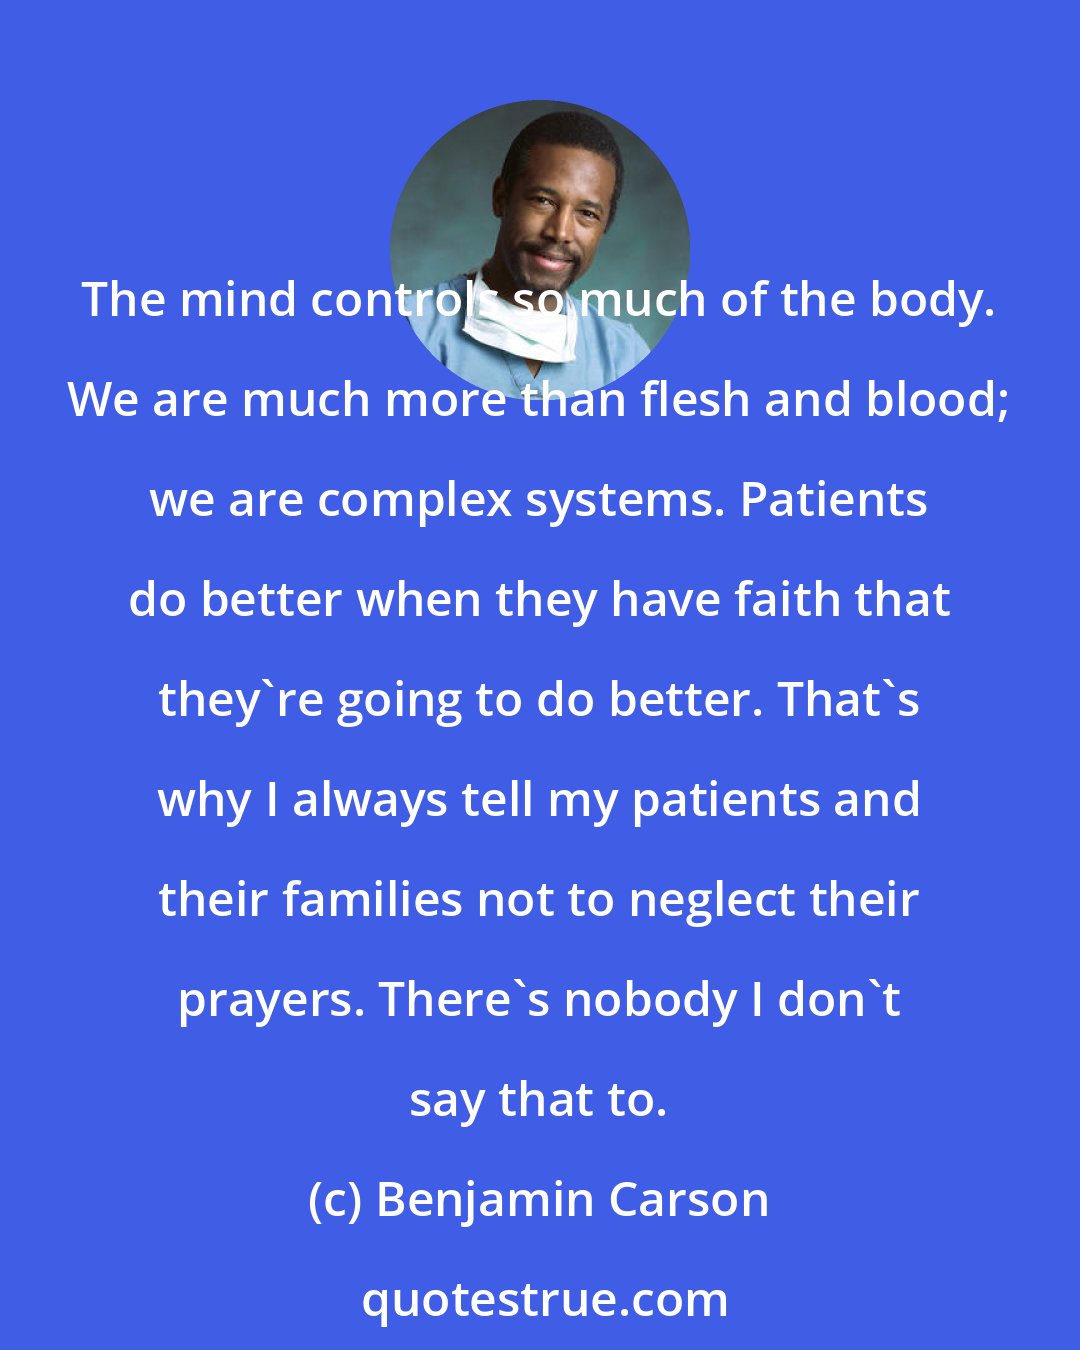 Benjamin Carson: The mind controls so much of the body. We are much more than flesh and blood; we are complex systems. Patients do better when they have faith that they're going to do better. That's why I always tell my patients and their families not to neglect their prayers. There's nobody I don't say that to.